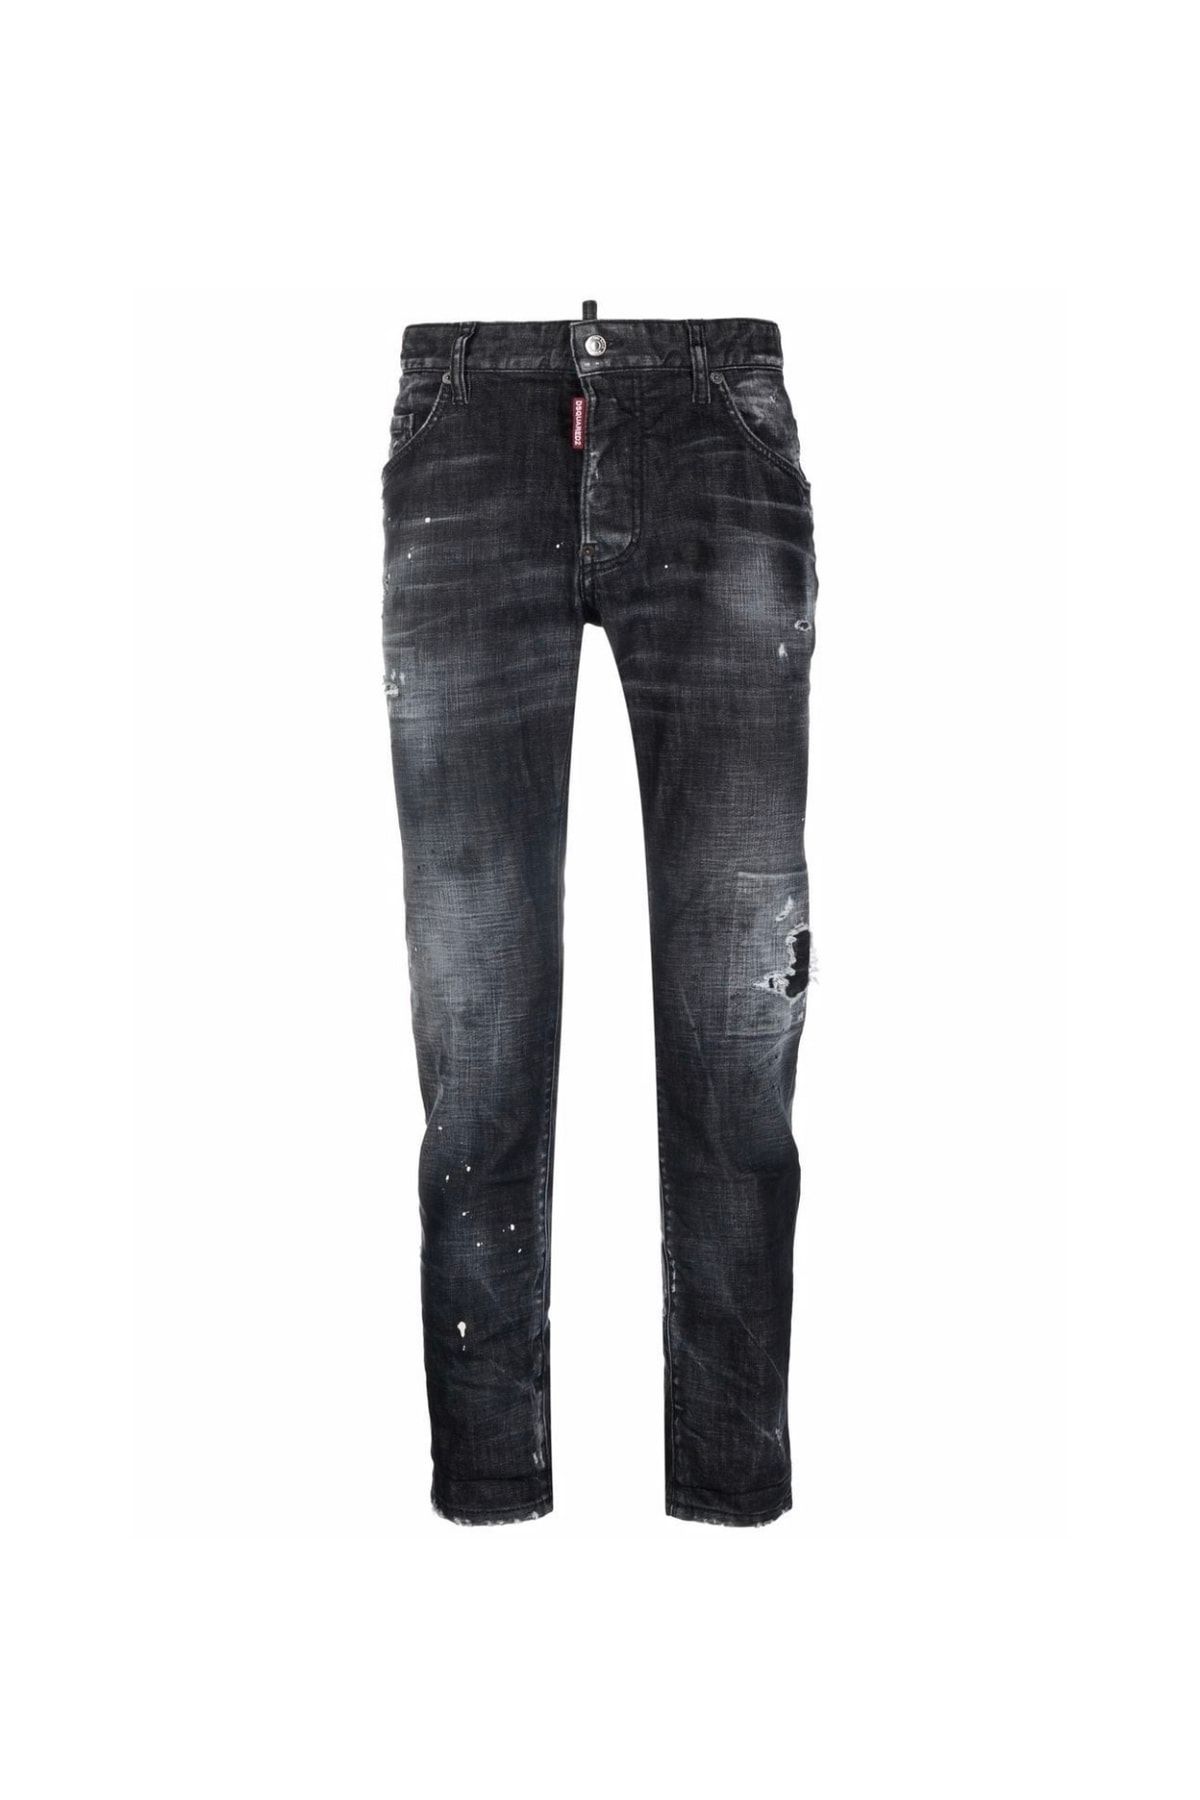 DSquared2 Mid-rise Distressed Straight Leg Jeans